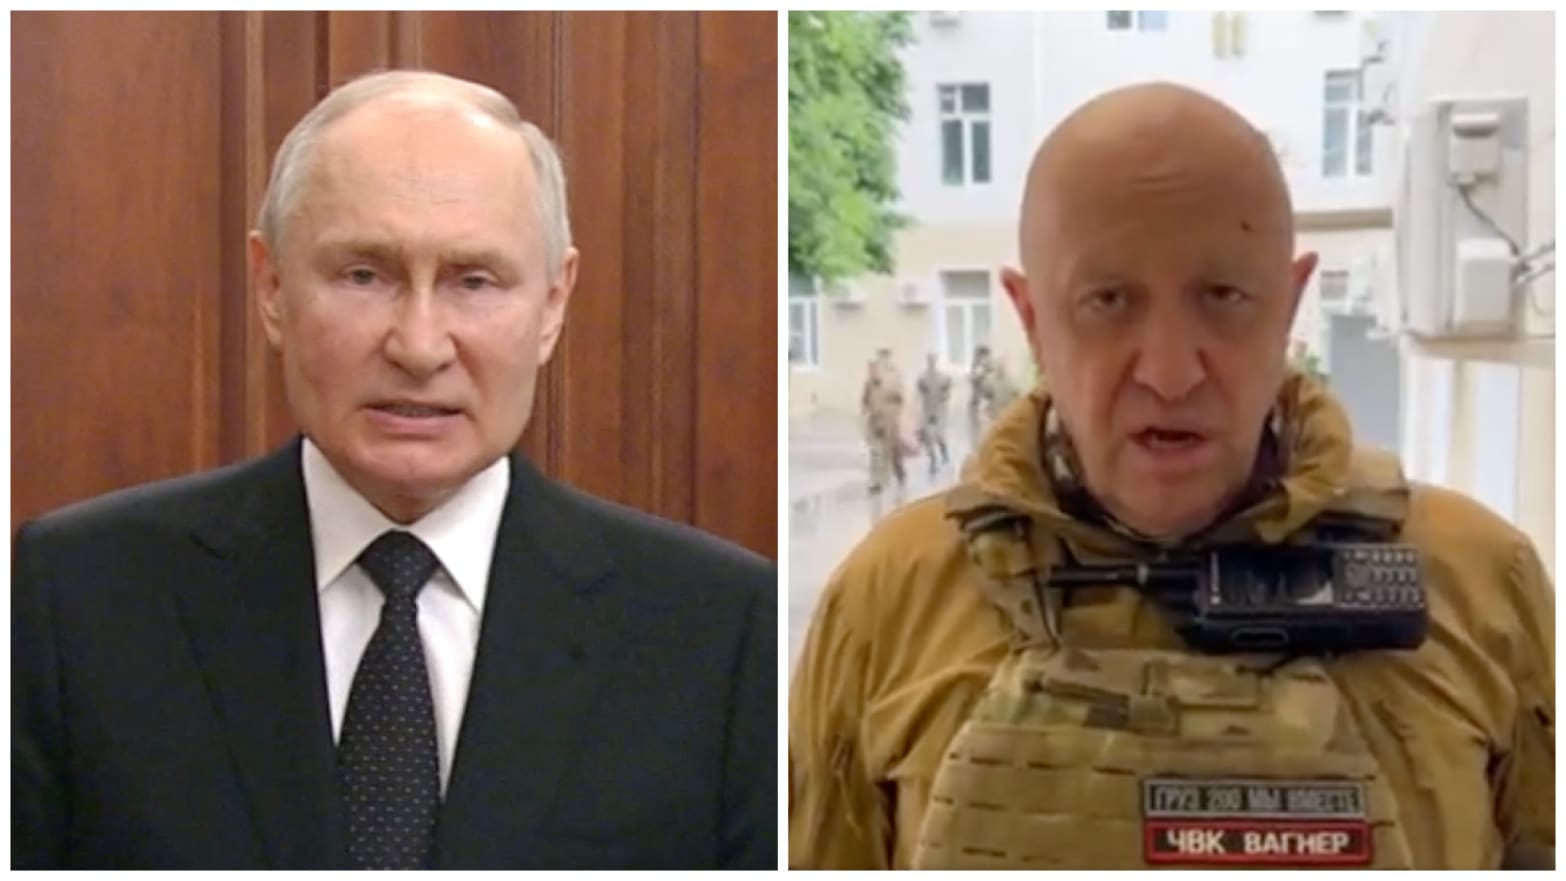 Vladimir Putin is going head to head with former friend Yevgeny Prigozhin in a potential civil war